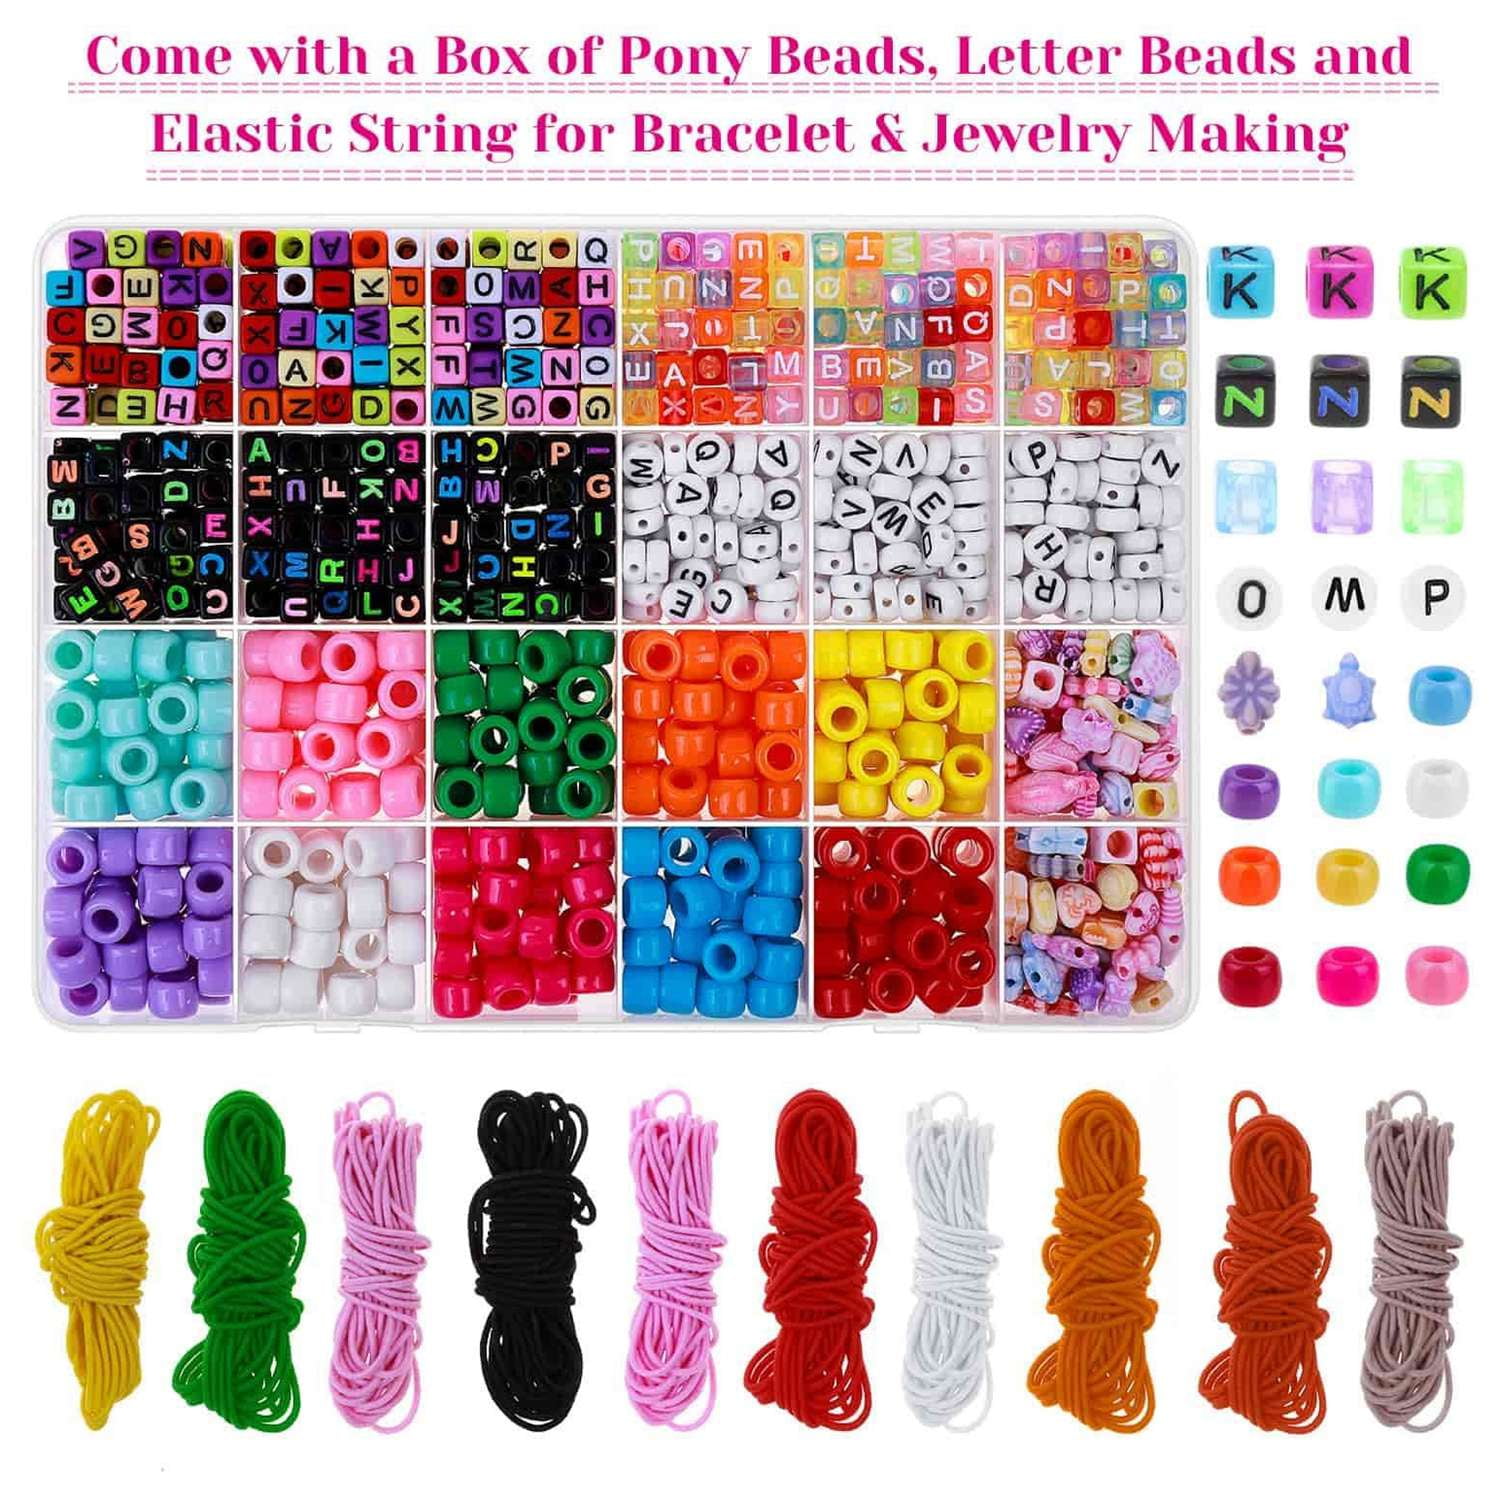 Clay Beads for Friendship Bracelets Kit, 24 Colors 6000Pcs Clay Beads  Jewery Making Kit, Taylor's Friendship Bracelets Making Kit, Letter Beads &  Various Jewelry Beads With Elastic String and Gift Box -